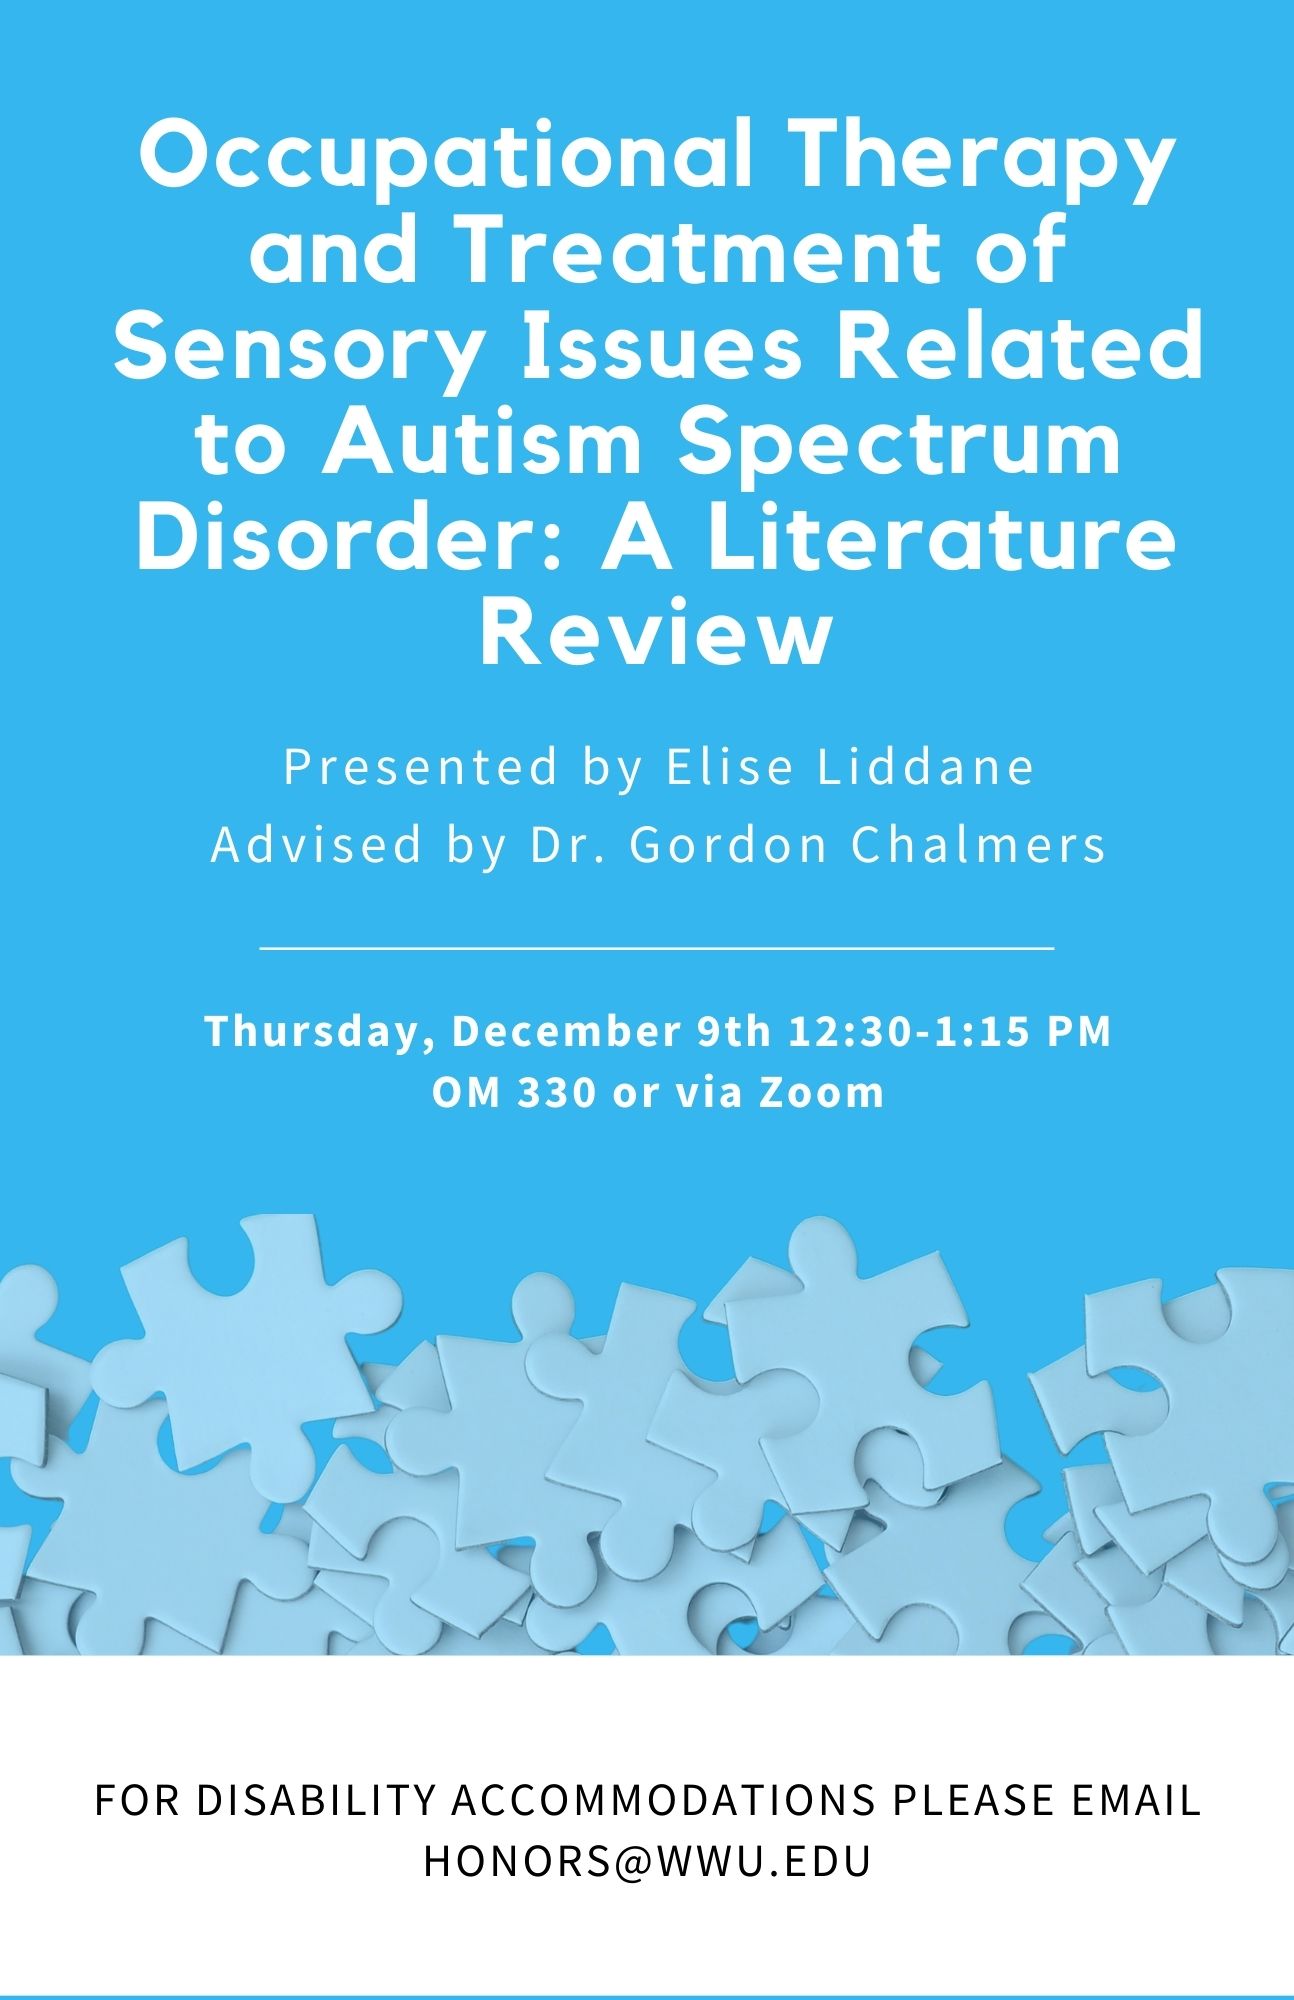 A blue poster with puzzle pieces. It says "Occupational Therapy and Treatment of Sensory Issues Related to Autism Spectrum Disorder: A Literature Review. Presented by Elise Liddane, Advised by Dr. Gordon Chalmers. Thursday, December 9th 12:30-11:15 PM in Old Main 330 or via Zoom. For disability accommodations please email honors@wwu.edu."